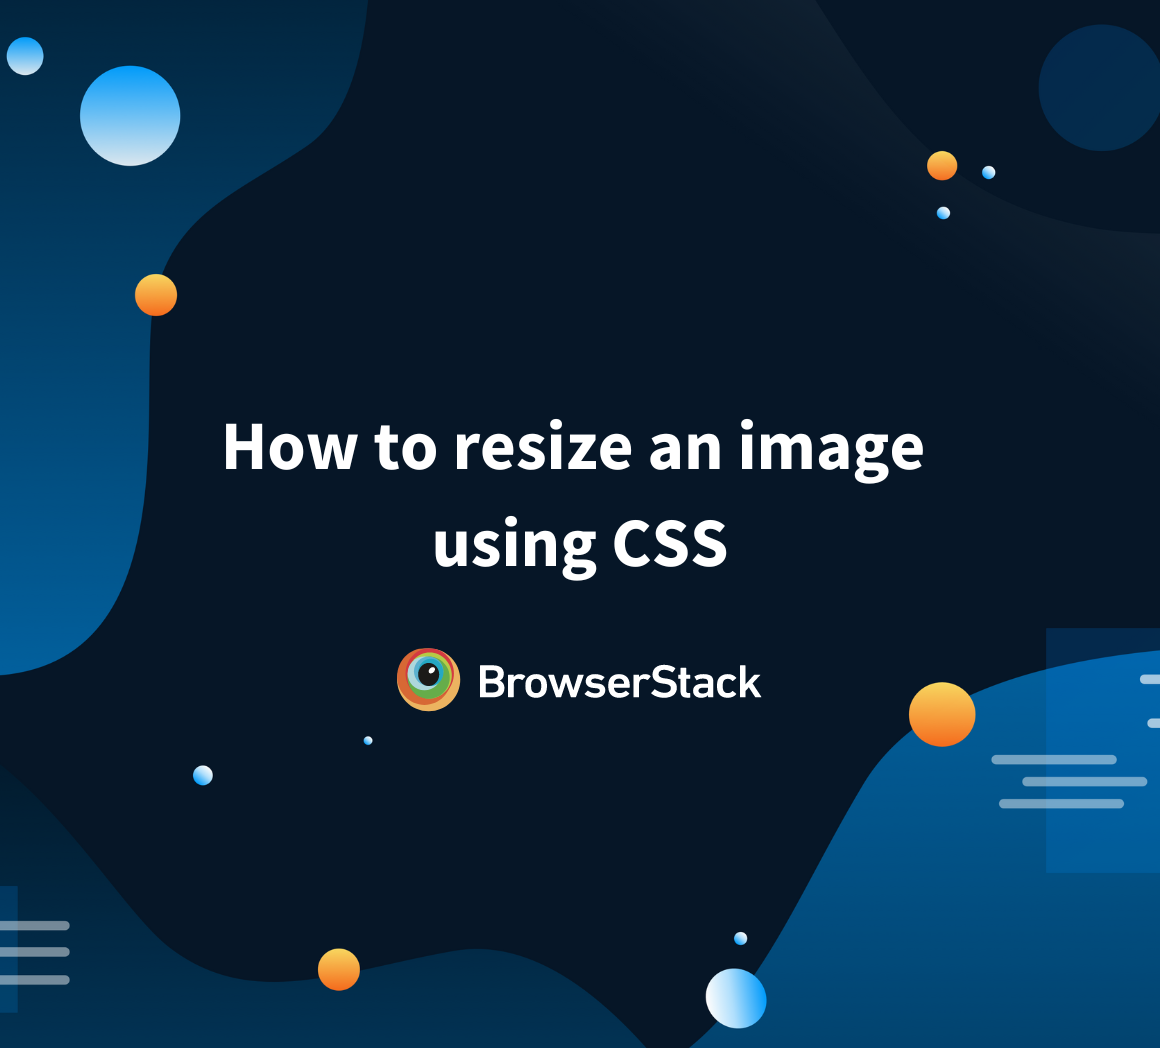 How to resize an image using CSS